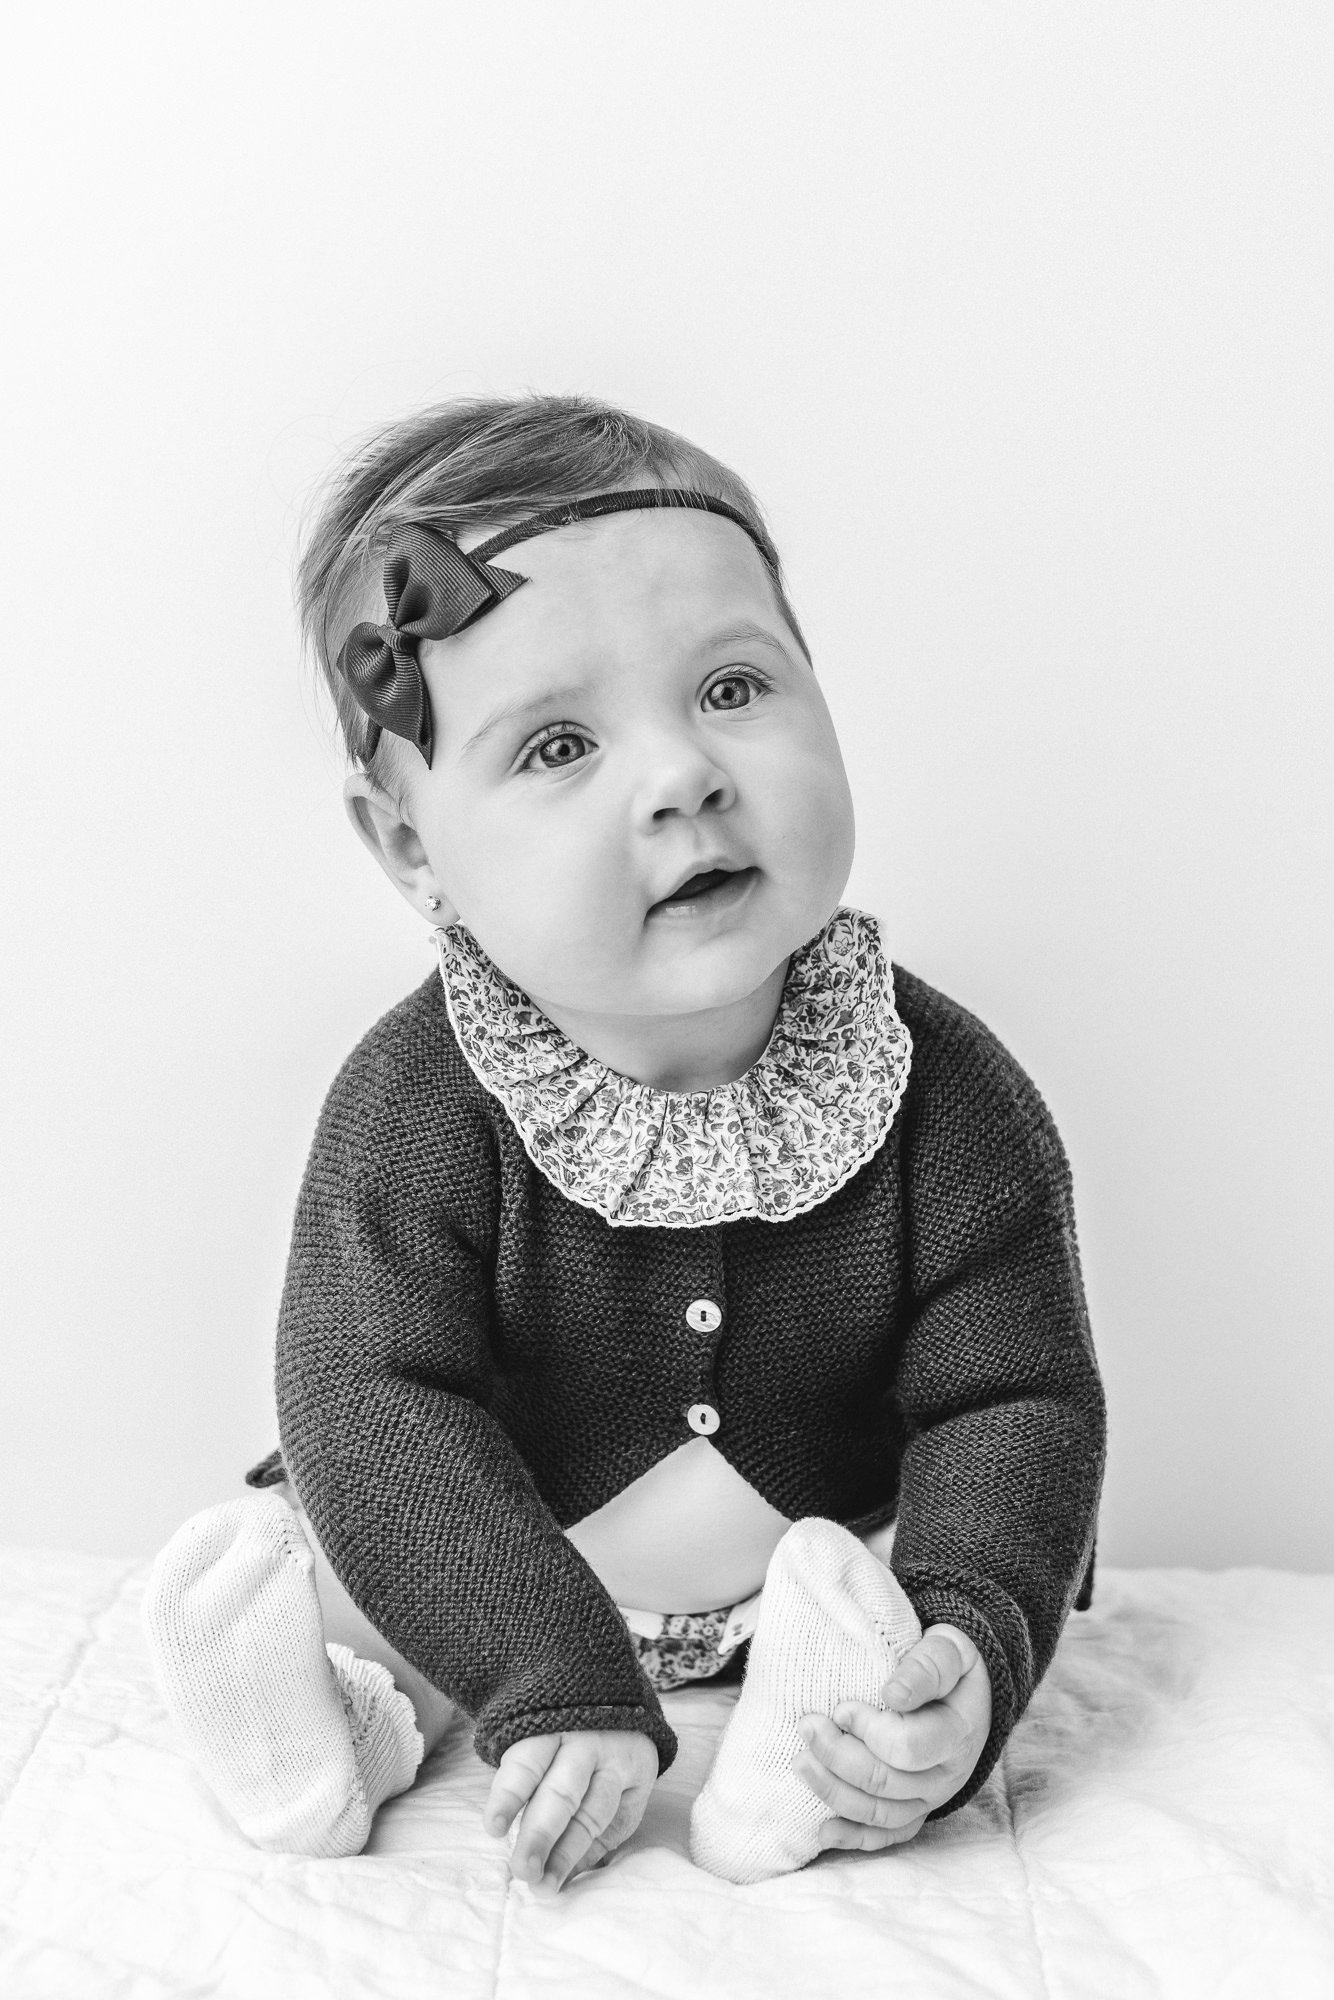  Small child sitting up in New Jersey studio during a portrait photoshoot. Picture is in black and white. Baby plays with her feet in this timeless image captured by Nicole Hawkins Photography&nbsp; #babystudioportraits #studionewborns #NewJerseyPhot